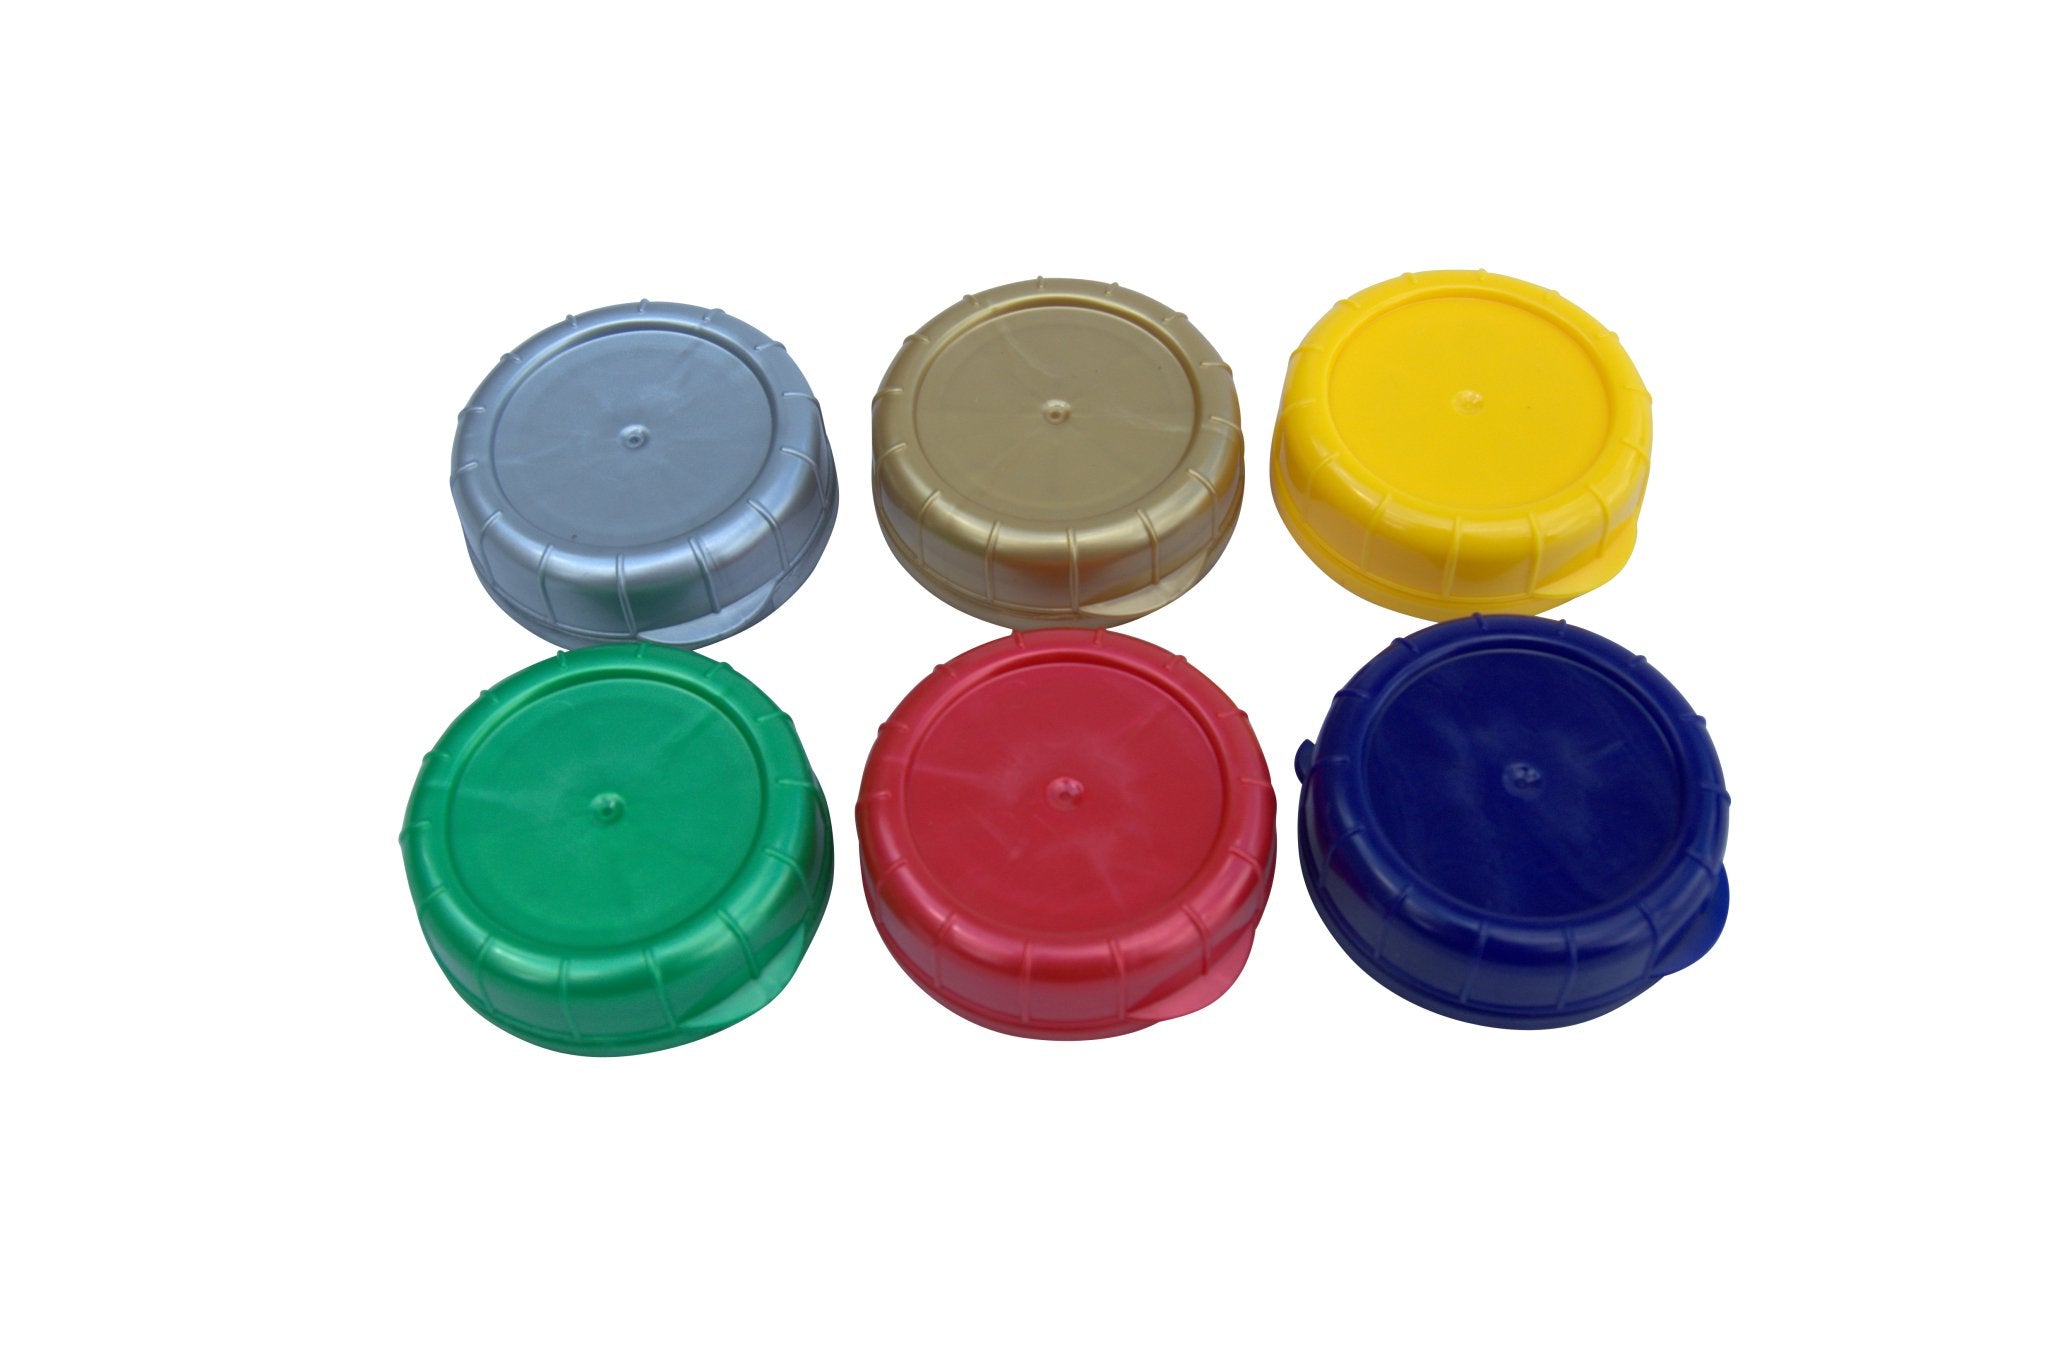 Glass Milk Bottle Caps - 12 Pack - Only Fits Milk Bottles with 48mm (1.87  inch) Tops, Snap On Lids: Home & Kitchen 